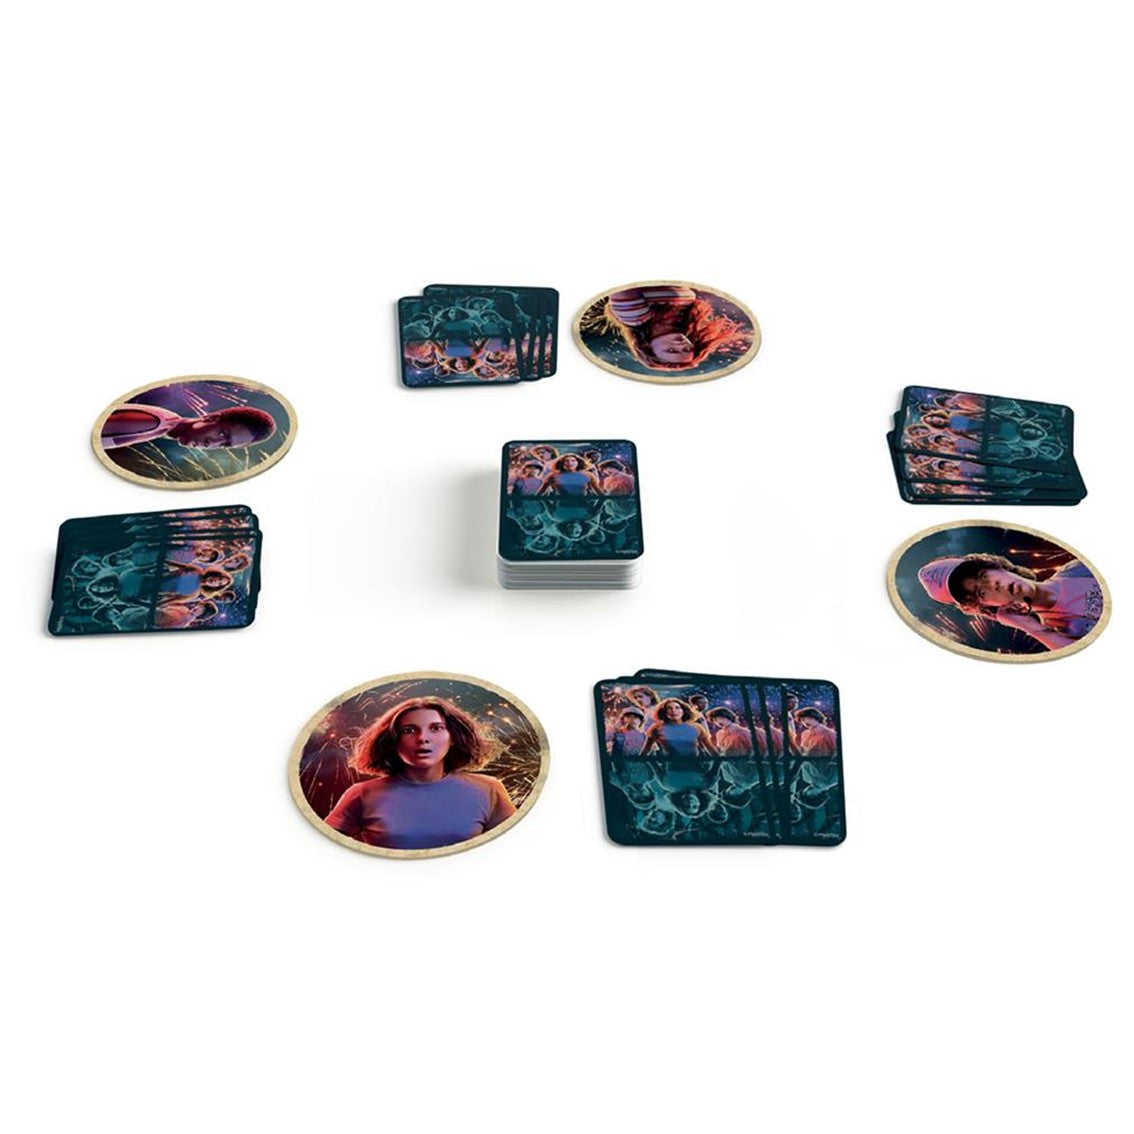 Juego de mesa Stranger Things: Attack of the Mind Flayer